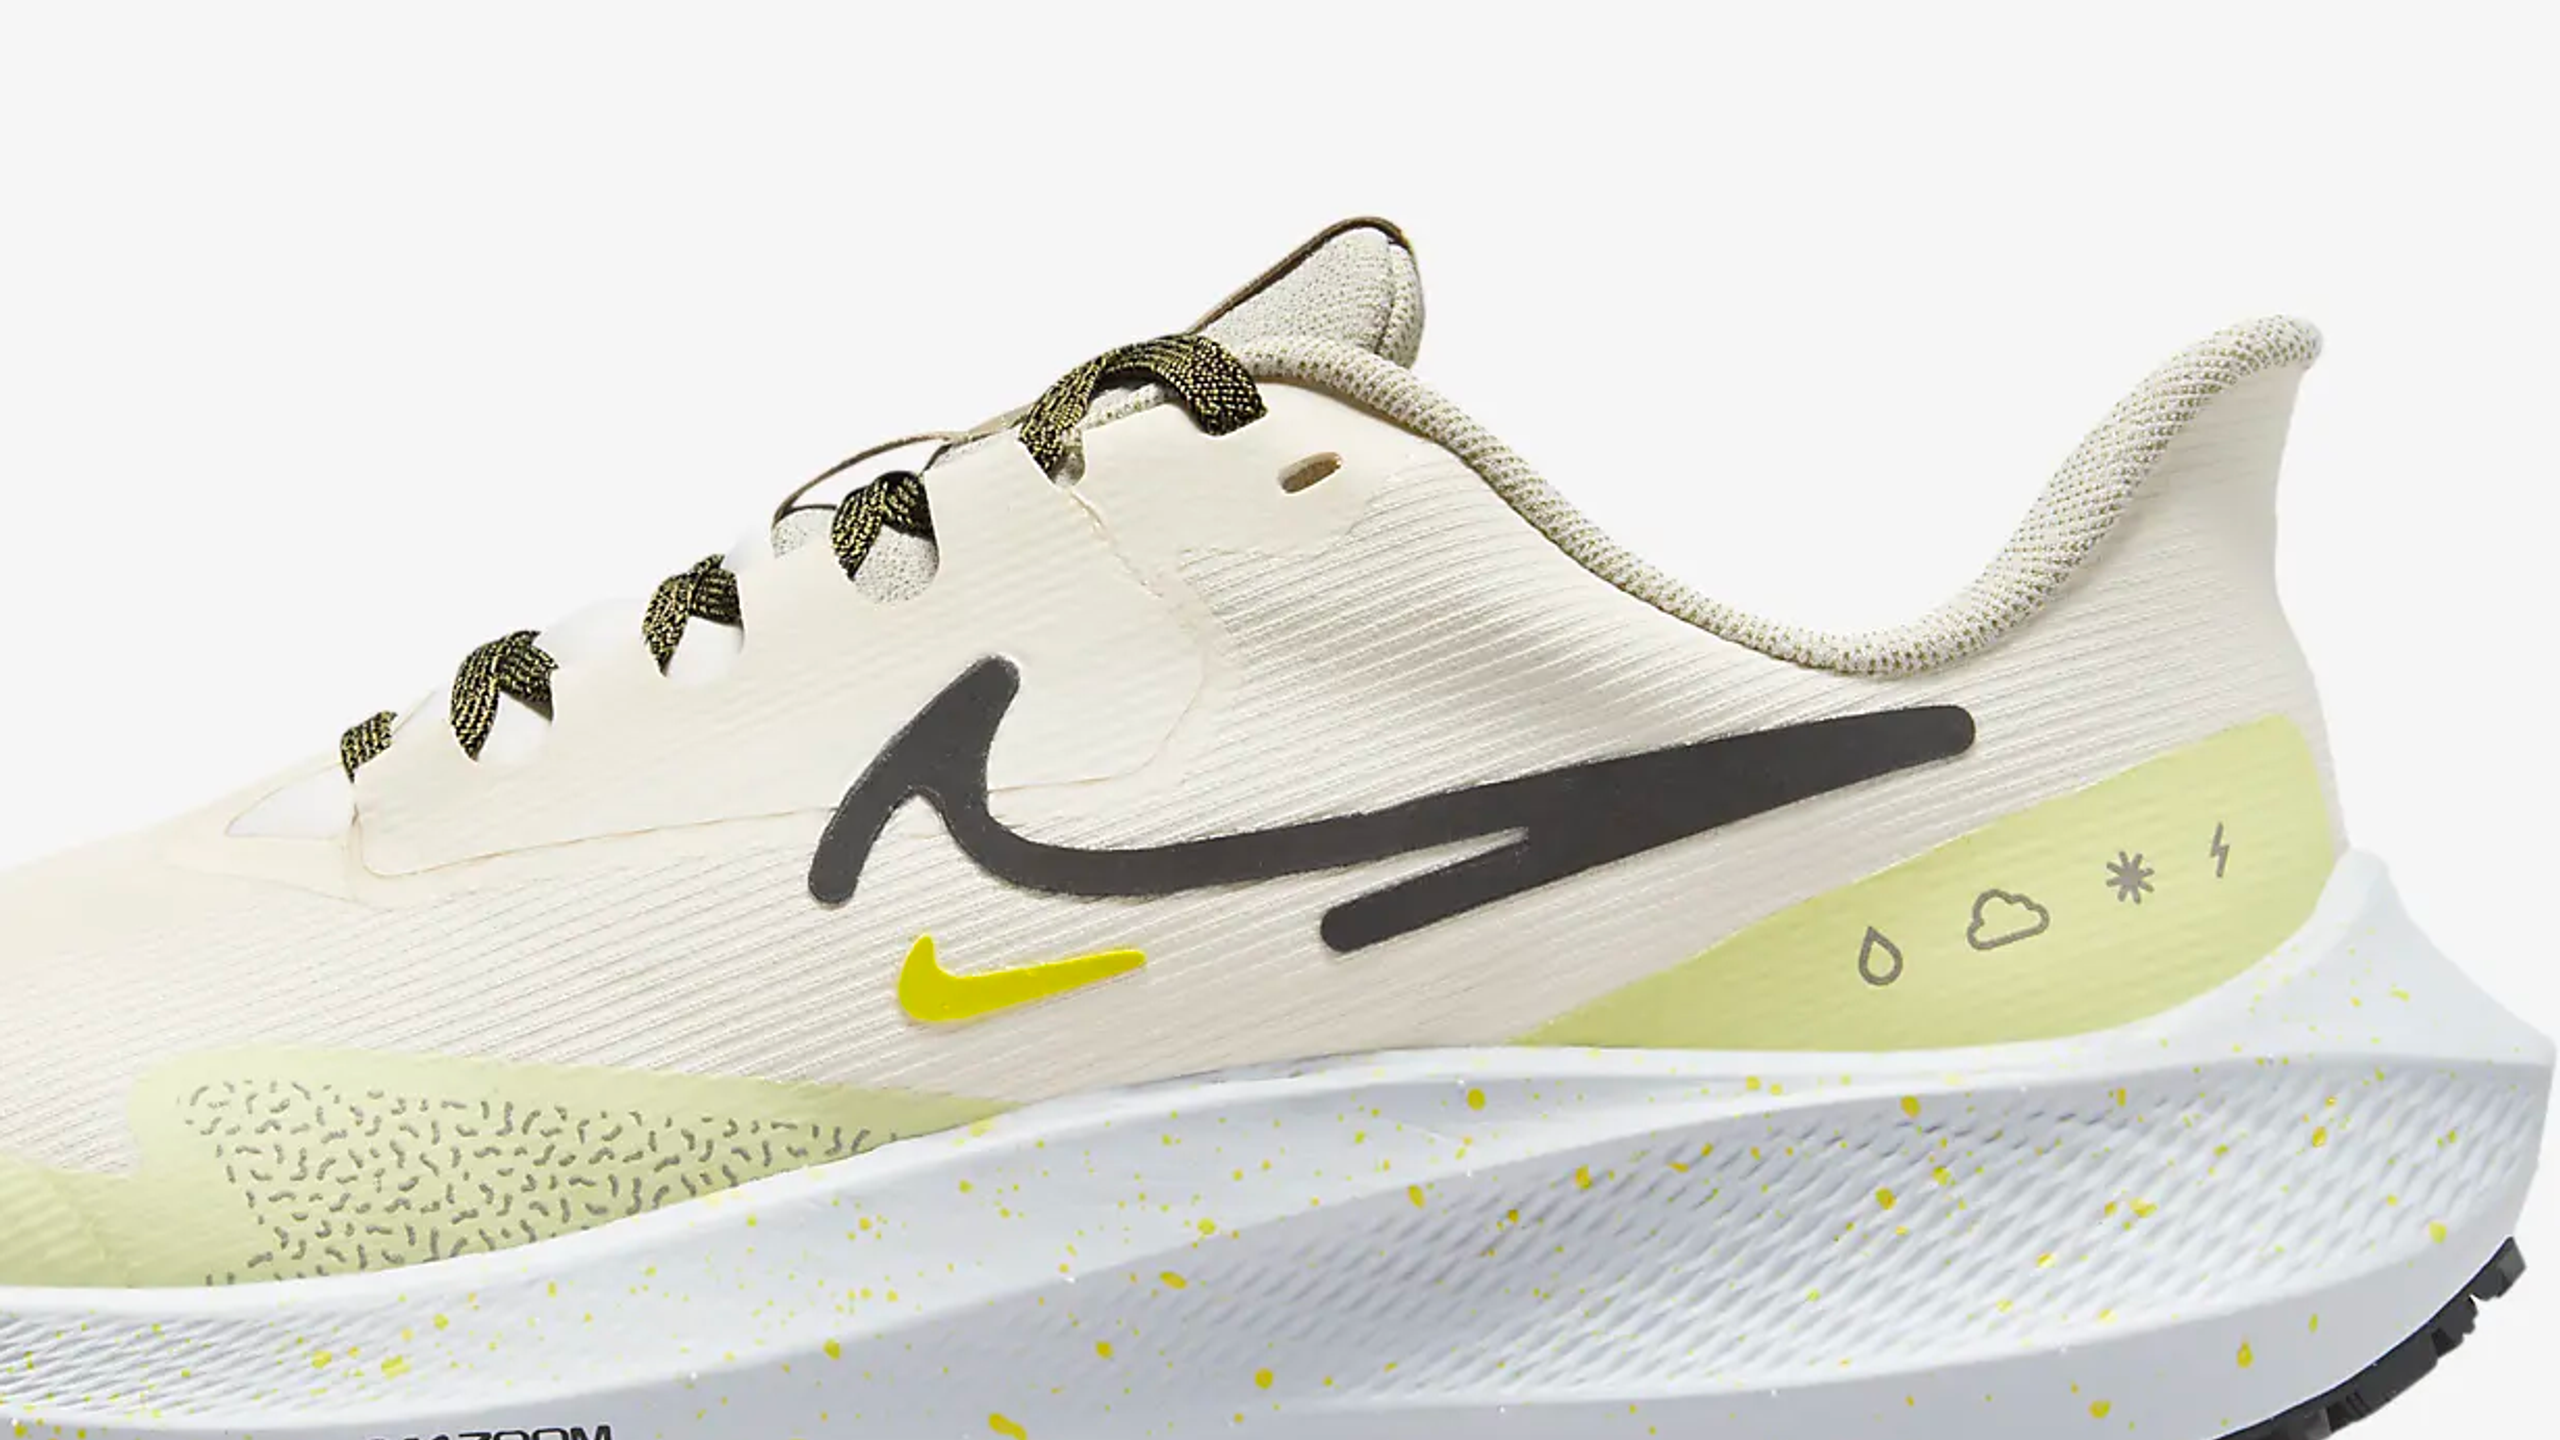 a pair of white and yellow nike running shoes​​​​‌﻿‍﻿​‍​‍‌‍﻿﻿‌﻿​‍‌‍‍‌‌‍‌﻿‌‍‍‌‌‍﻿‍​‍​‍​﻿‍‍​‍​‍‌﻿​﻿‌‍​‌‌‍﻿‍‌‍‍‌‌﻿‌​‌﻿‍‌​‍﻿‍‌‍‍‌‌‍﻿﻿​‍​‍​‍﻿​​‍​‍‌‍‍​‌﻿​‍‌‍‌‌‌‍‌‍​‍​‍​﻿‍‍​‍​‍‌‍‍​‌﻿‌​‌﻿‌​‌﻿​​​﻿‍‍​‍﻿﻿​‍﻿﻿‌‍﻿​‌‍﻿﻿‌‍​﻿‌‍​‌‌‍﻿​‌‍‍​‌‍﻿﻿‌﻿​﻿‌﻿‌​​﻿‍‍​﻿​﻿​﻿​﻿​﻿​﻿​﻿​﻿​‍﻿﻿‌‍‍‌‌‍﻿‍‌﻿‌​‌‍‌‌‌‍﻿‍‌﻿‌​​‍﻿﻿‌‍‌‌‌‍‌​‌‍‍‌‌﻿‌​​‍﻿﻿‌‍﻿‌‌‍﻿﻿‌‍‌​‌‍‌‌​﻿﻿‌‌﻿​​‌﻿​‍‌‍‌‌‌﻿​﻿‌‍‌‌‌‍﻿‍‌﻿‌​‌‍​‌‌﻿‌​‌‍‍‌‌‍﻿﻿‌‍﻿‍​﻿‍﻿‌‍‍‌‌‍‌​​﻿﻿‌​﻿​​‌‍‌‌​﻿‌‍‌‍‌‍‌‍​‌​﻿​‍​﻿​﻿​﻿‌‌​‍﻿‌​﻿​﻿‌‍​‍‌‍‌​​﻿‌‌​‍﻿‌​﻿‌​​﻿​‌‌‍​﻿‌‍​﻿​‍﻿‌​﻿‍‌‌‍‌‍​﻿​‍​﻿‌‌​‍﻿‌​﻿‌‌​﻿​﻿‌‍‌​‌‍​﻿​﻿​​‌‍​‌​﻿‌‌‌‍‌‍‌‍‌‍​﻿‌﻿‌‍‌​​﻿​‍​﻿‍﻿‌﻿‌​‌﻿‍‌‌﻿​​‌‍‌‌​﻿﻿‌‌﻿​﻿‌‍‍​‌‍﻿﻿‌‍‌‌​﻿‍﻿‌﻿​​‌‍​‌‌﻿‌​‌‍‍​​﻿﻿‌‌‍﻿‌‌‍‌‌‌‍‌​‌‍‍‌‌‍​‌​‍‌‌​﻿‌‌‌​​‍‌‌﻿﻿‌‍‍﻿‌‍‌‌‌﻿‍‌​‍‌‌​﻿​﻿‌​‌​​‍‌‌​﻿​﻿‌​‌​​‍‌‌​﻿​‍​﻿​‍​﻿‍​​﻿​‌‌‍​‌‌‍‌​‌‍‌‌‌‍‌‌​﻿​‌​﻿‌‌‌‍‌‍​﻿‌﻿​﻿‌​‌‍‌‍​‍‌‌​﻿​‍​﻿​‍​‍‌‌​﻿‌‌‌​‌​​‍﻿‍‌‍​‌‌‍﻿​‌﻿‌​​﻿﻿﻿‌‍​‍‌‍​‌‌﻿​﻿‌‍‌‌‌‌‌‌‌﻿​‍‌‍﻿​​﻿﻿‌‌‍‍​‌﻿‌​‌﻿‌​‌﻿​​​‍‌‌​﻿​﻿‌​​‌​‍‌‌​﻿​‍‌​‌‍​‍‌‌​﻿​‍‌​‌‍‌‍﻿​‌‍﻿﻿‌‍​﻿‌‍​‌‌‍﻿​‌‍‍​‌‍﻿﻿‌﻿​﻿‌﻿‌​​‍‌‌​﻿​﻿‌​​‌​﻿​﻿​﻿​﻿​﻿​﻿​﻿​﻿​‍‌‍‌‍‍‌‌‍‌​​﻿﻿‌​﻿​​‌‍‌‌​﻿‌‍‌‍‌‍‌‍​‌​﻿​‍​﻿​﻿​﻿‌‌​‍﻿‌​﻿​﻿‌‍​‍‌‍‌​​﻿‌‌​‍﻿‌​﻿‌​​﻿​‌‌‍​﻿‌‍​﻿​‍﻿‌​﻿‍‌‌‍‌‍​﻿​‍​﻿‌‌​‍﻿‌​﻿‌‌​﻿​﻿‌‍‌​‌‍​﻿​﻿​​‌‍​‌​﻿‌‌‌‍‌‍‌‍‌‍​﻿‌﻿‌‍‌​​﻿​‍​‍‌‍‌﻿‌​‌﻿‍‌‌﻿​​‌‍‌‌​﻿﻿‌‌﻿​﻿‌‍‍​‌‍﻿﻿‌‍‌‌​‍‌‍‌﻿​​‌‍​‌‌﻿‌​‌‍‍​​﻿﻿‌‌‍﻿‌‌‍‌‌‌‍‌​‌‍‍‌‌‍​‌​‍‌‌​﻿‌‌‌​​‍‌‌﻿﻿‌‍‍﻿‌‍‌‌‌﻿‍‌​‍‌‌​﻿​﻿‌​‌​​‍‌‌​﻿​﻿‌​‌​​‍‌‌​﻿​‍​﻿​‍​﻿‍​​﻿​‌‌‍​‌‌‍‌​‌‍‌‌‌‍‌‌​﻿​‌​﻿‌‌‌‍‌‍​﻿‌﻿​﻿‌​‌‍‌‍​‍‌‌​﻿​‍​﻿​‍​‍‌‌​﻿‌‌‌​‌​​‍﻿‍‌‍​‌‌‍﻿​‌﻿‌​​‍​‍‌﻿﻿‌